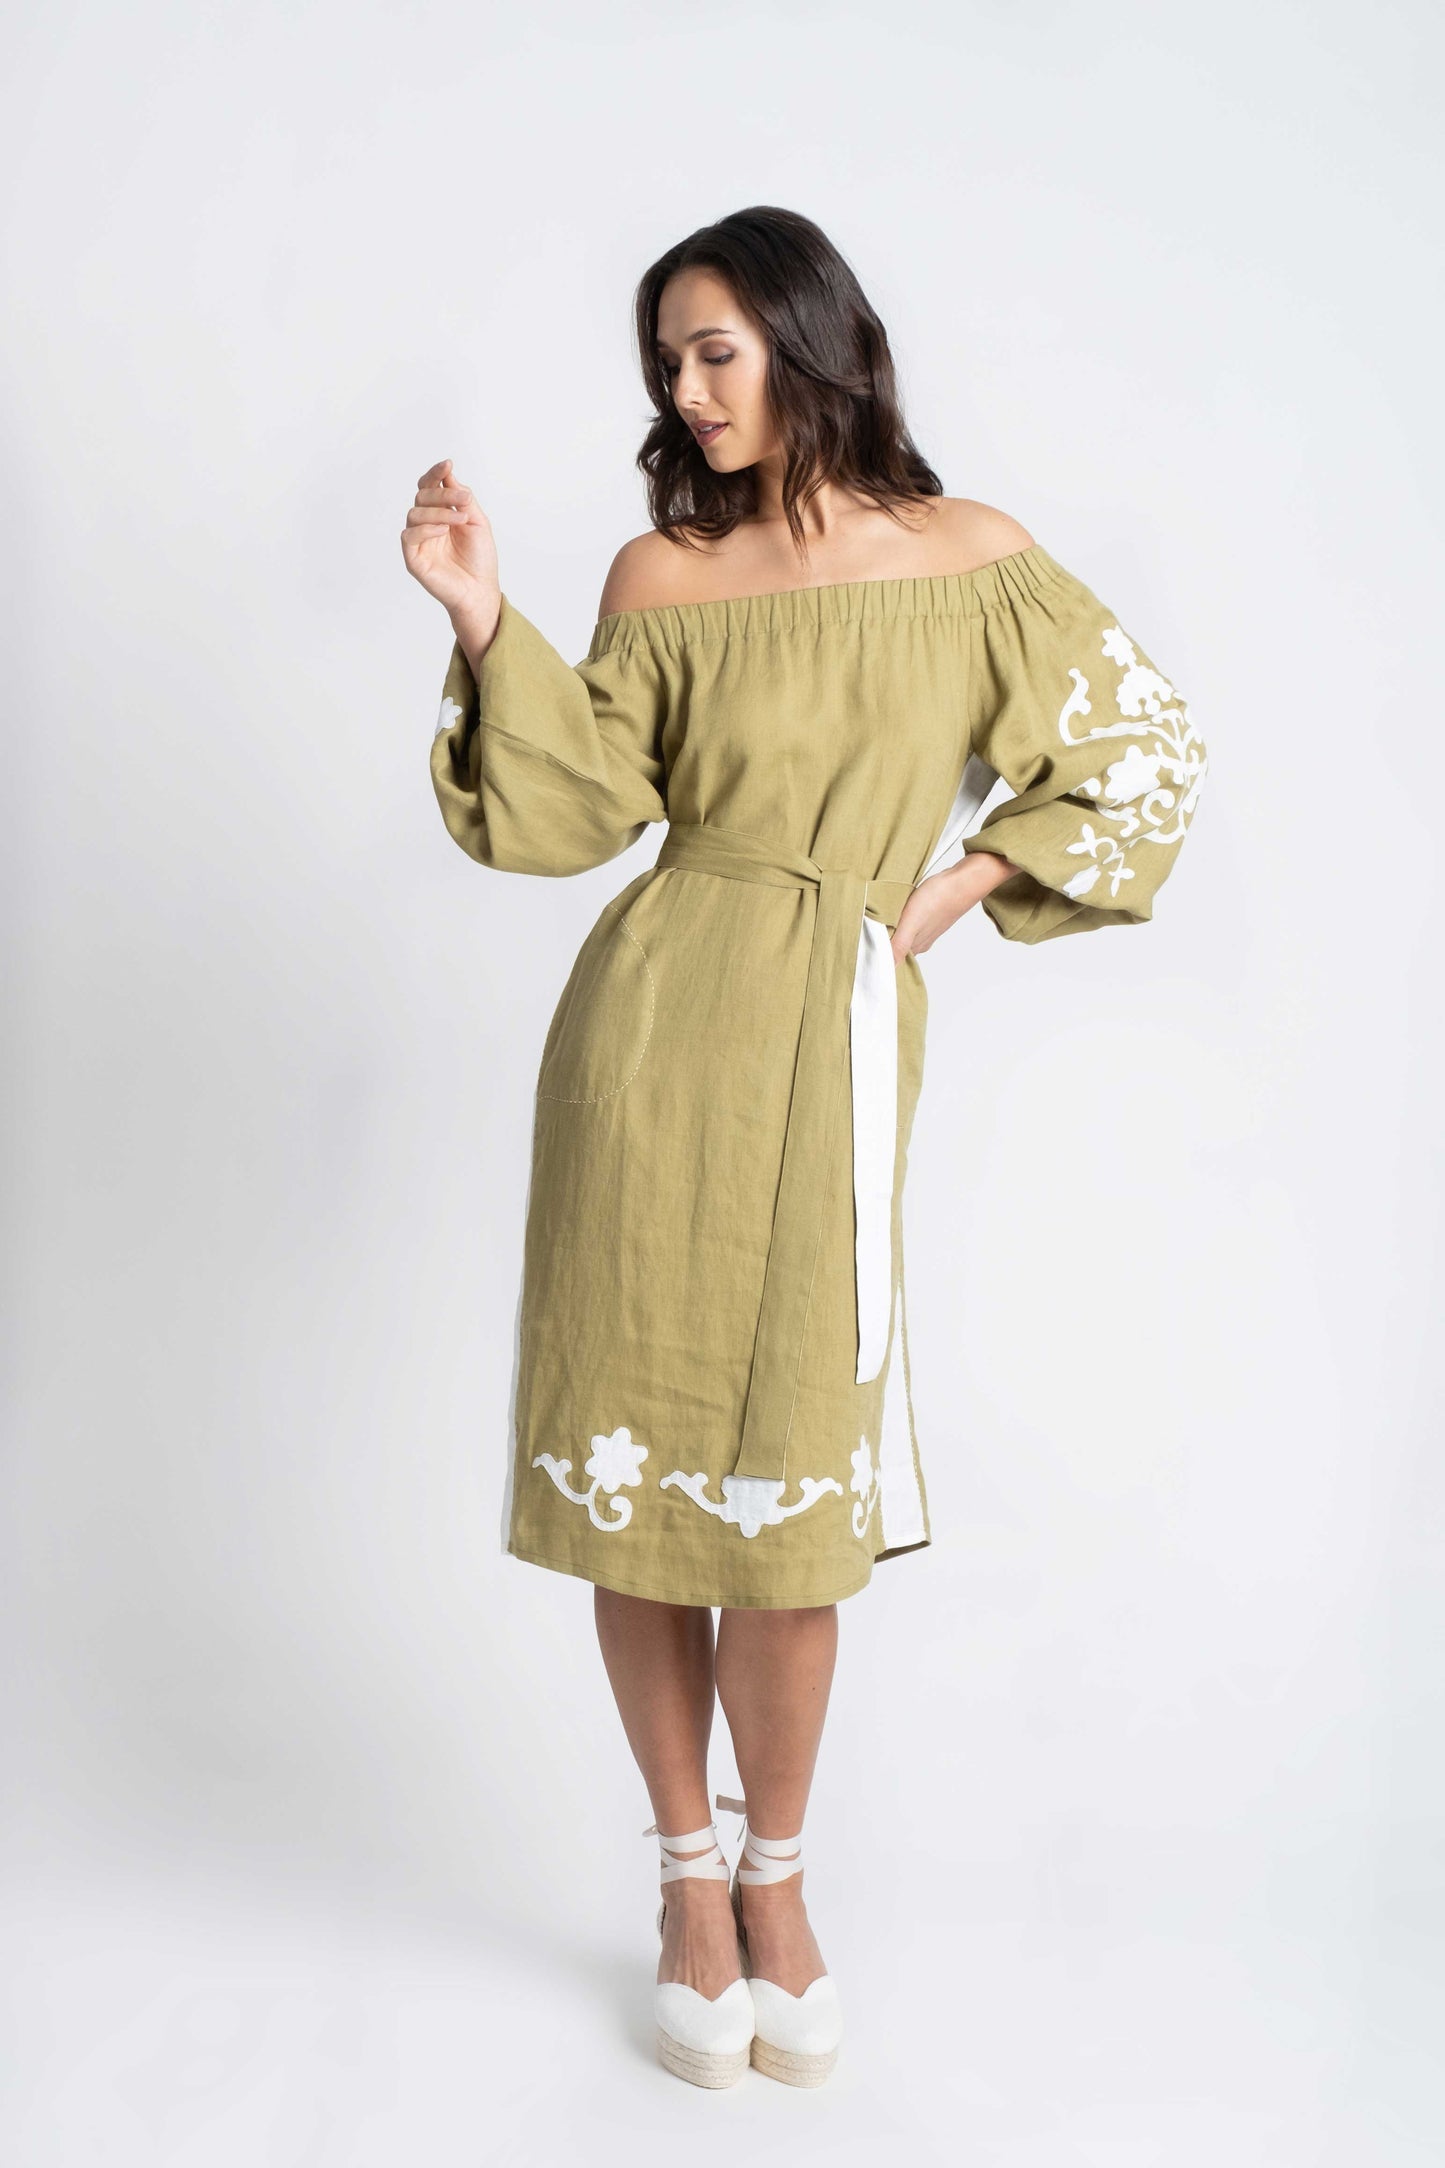 Olive linen belted dress embroidered in white.